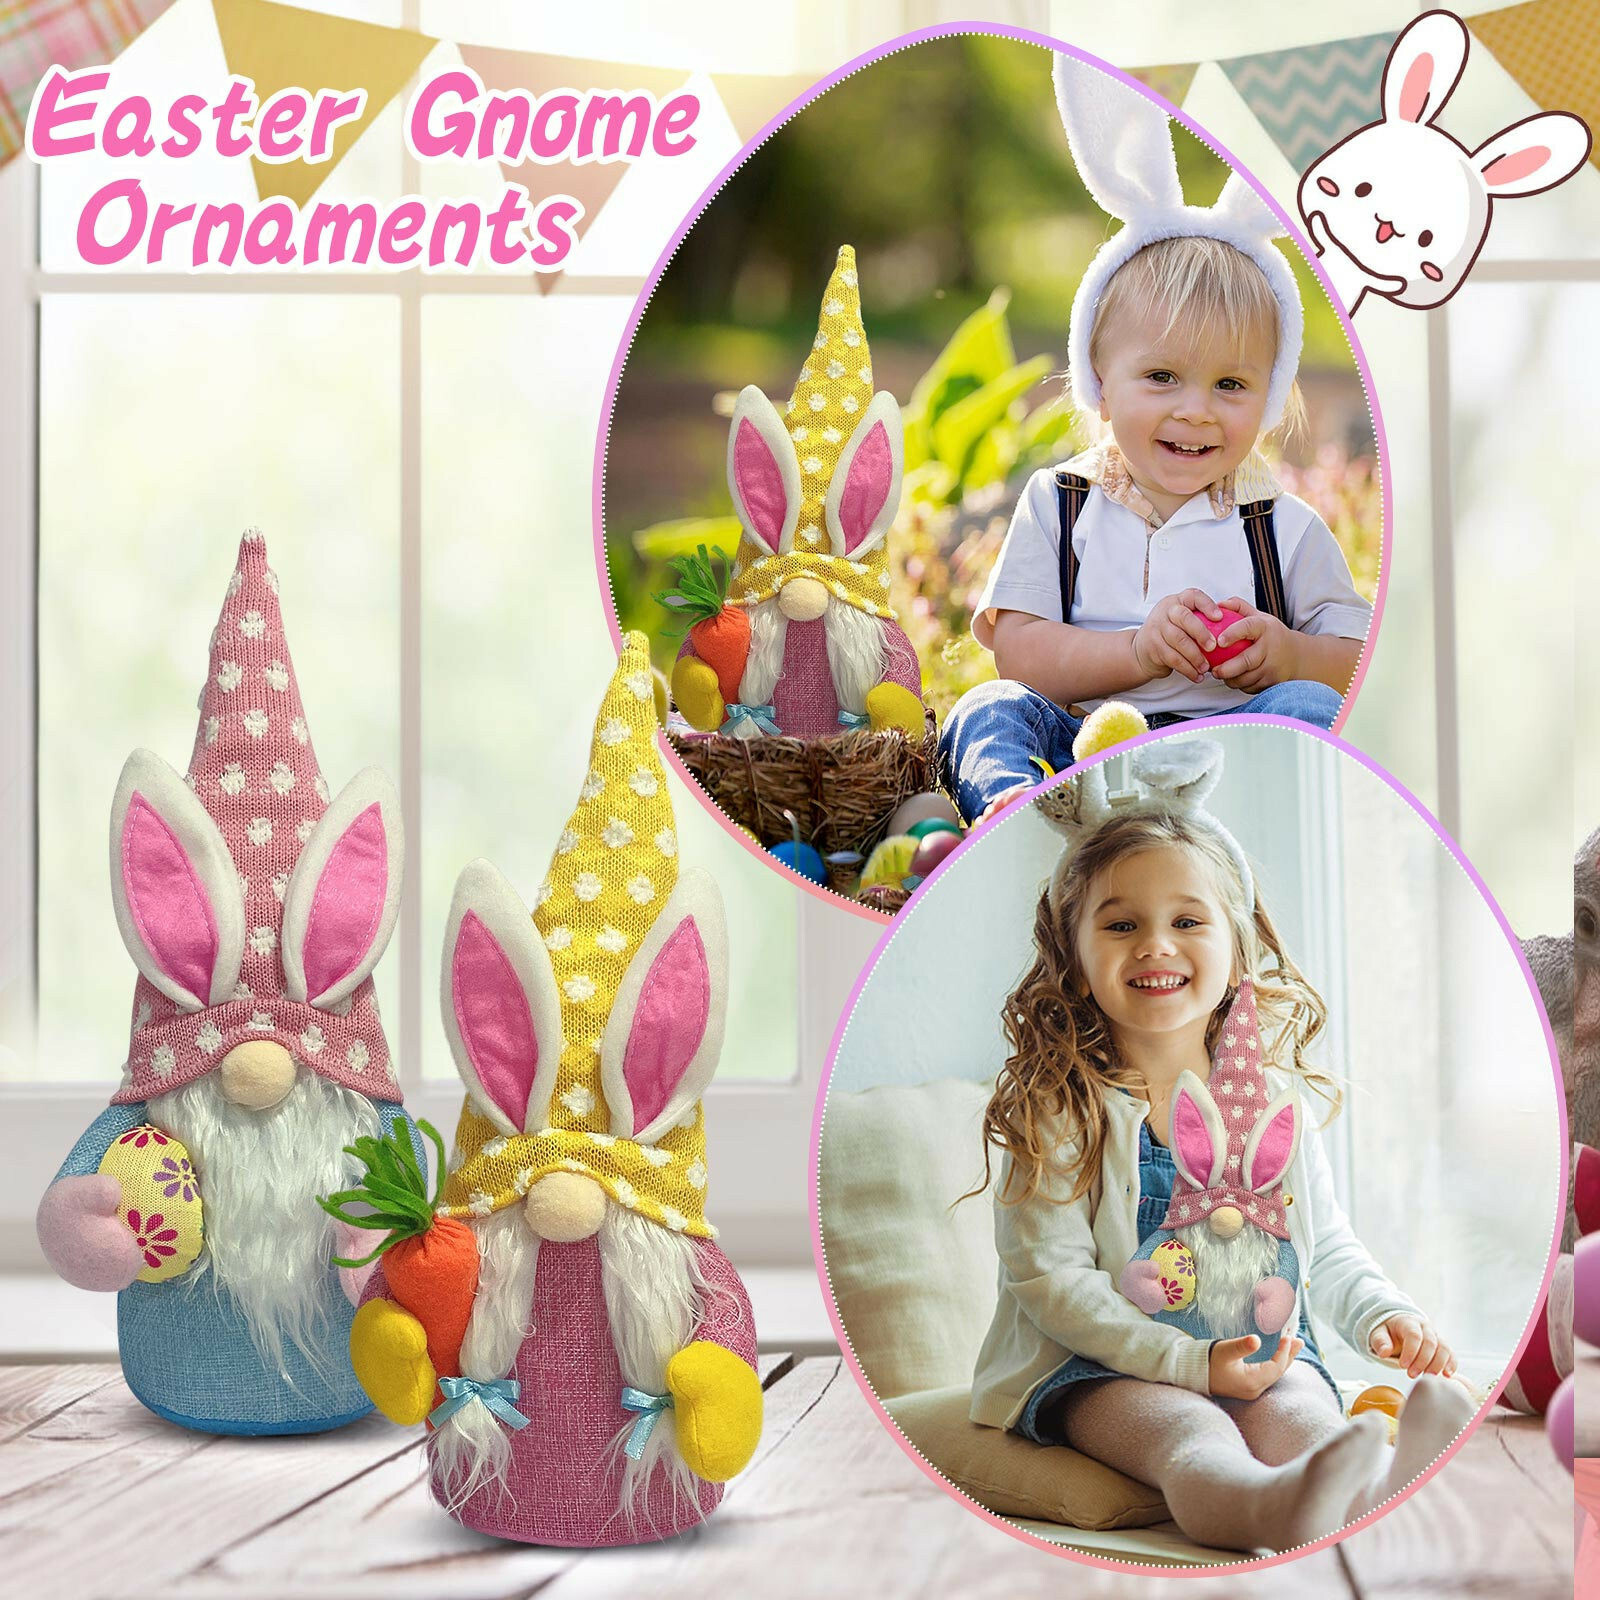 Event Plushies Charming Easter Gnome Doll - Window Ornament for Home Decor